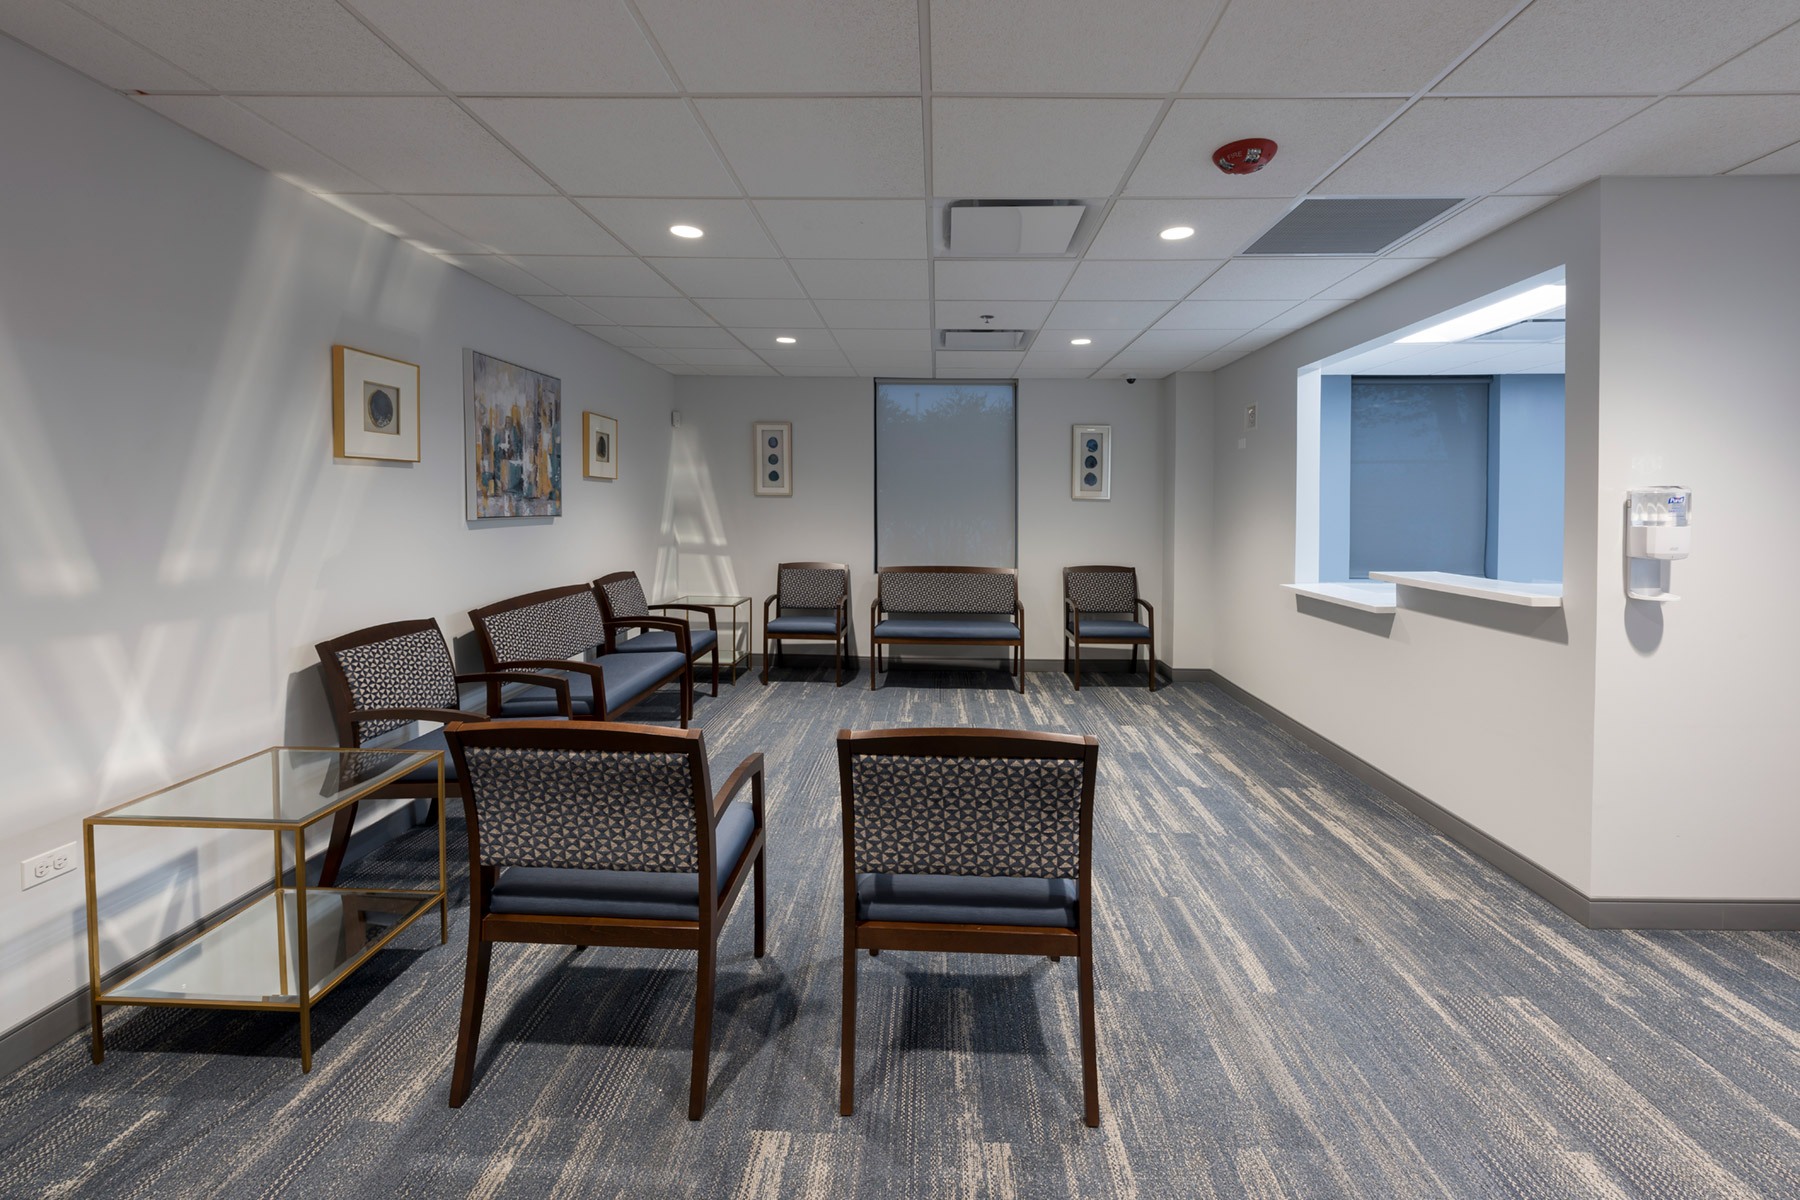 Waiting room - Commercial Build-Out of Retina Surgical Center in Niles Custom Home. America's Custom Home Builders: New Construction, Remodeling, Restoration Services. Residential and Commercial.